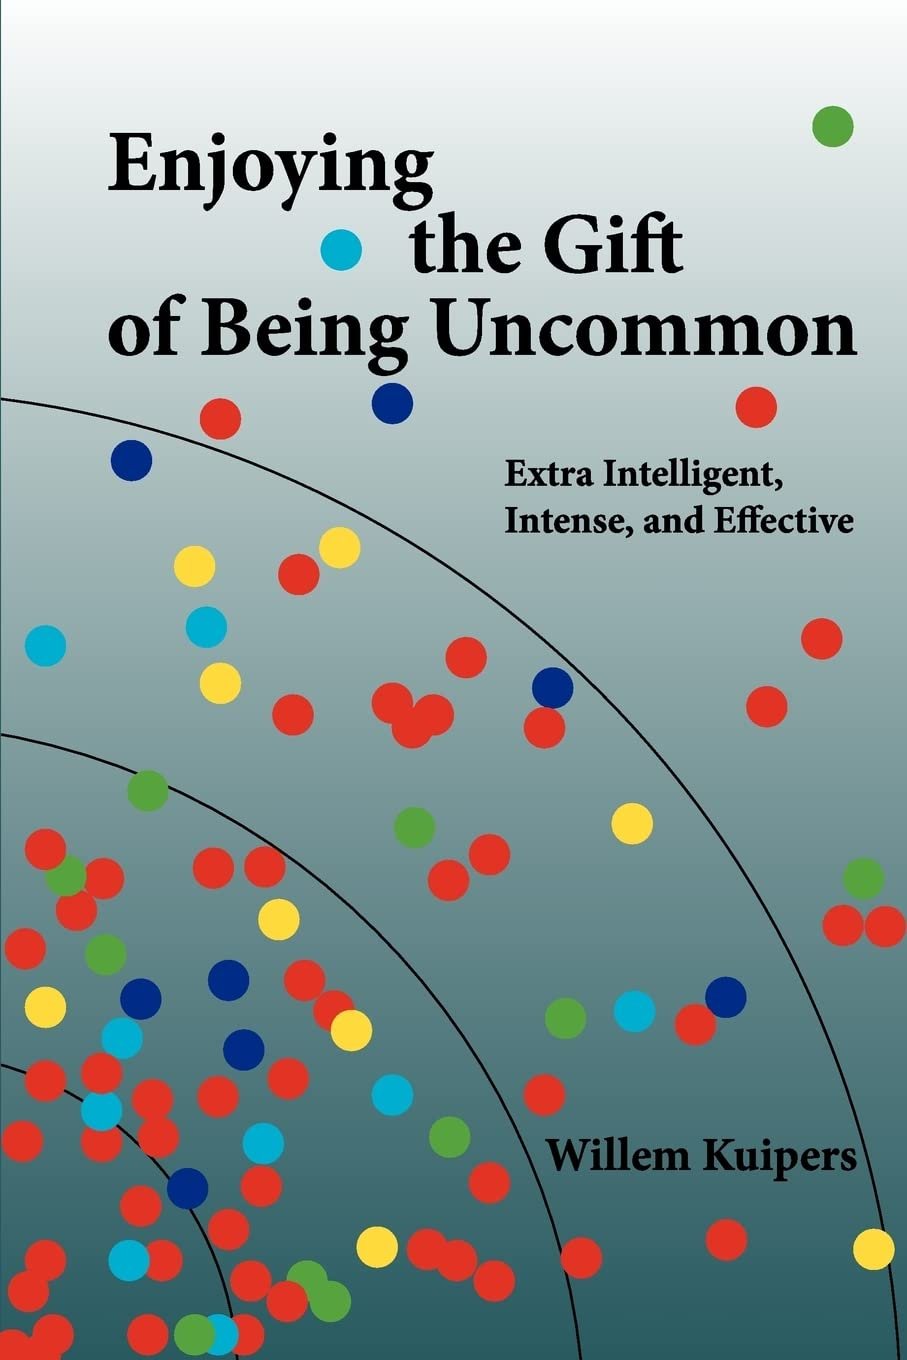 Enjoying the Gift of Being Uncommon / Willem Kuipers (CreateSpace, 2011)